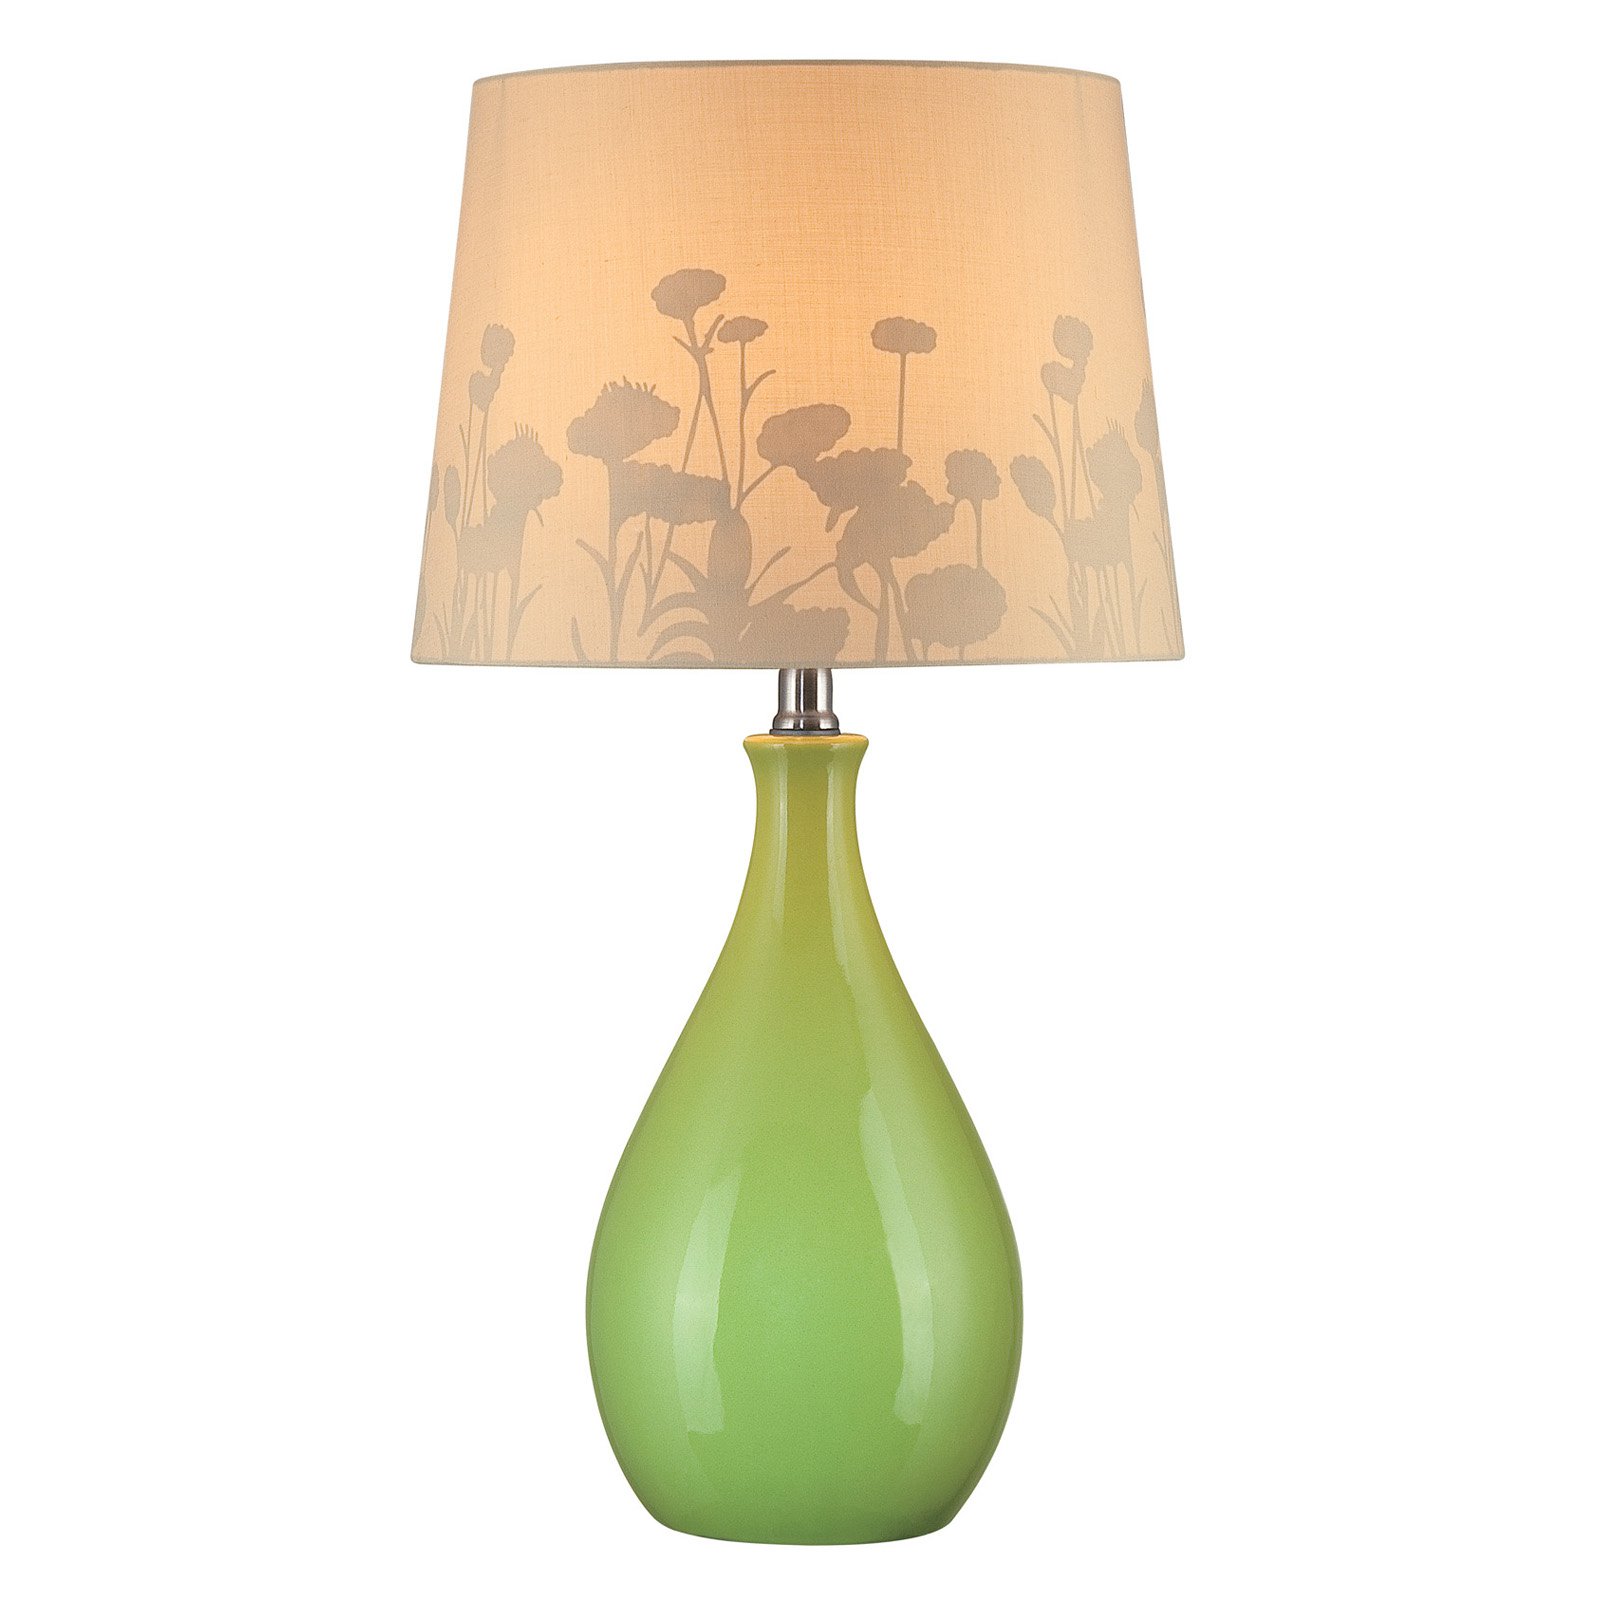 Lite Source Ls-21489 1 Light Up / Down Lighting Table Lamp - image 2 of 2